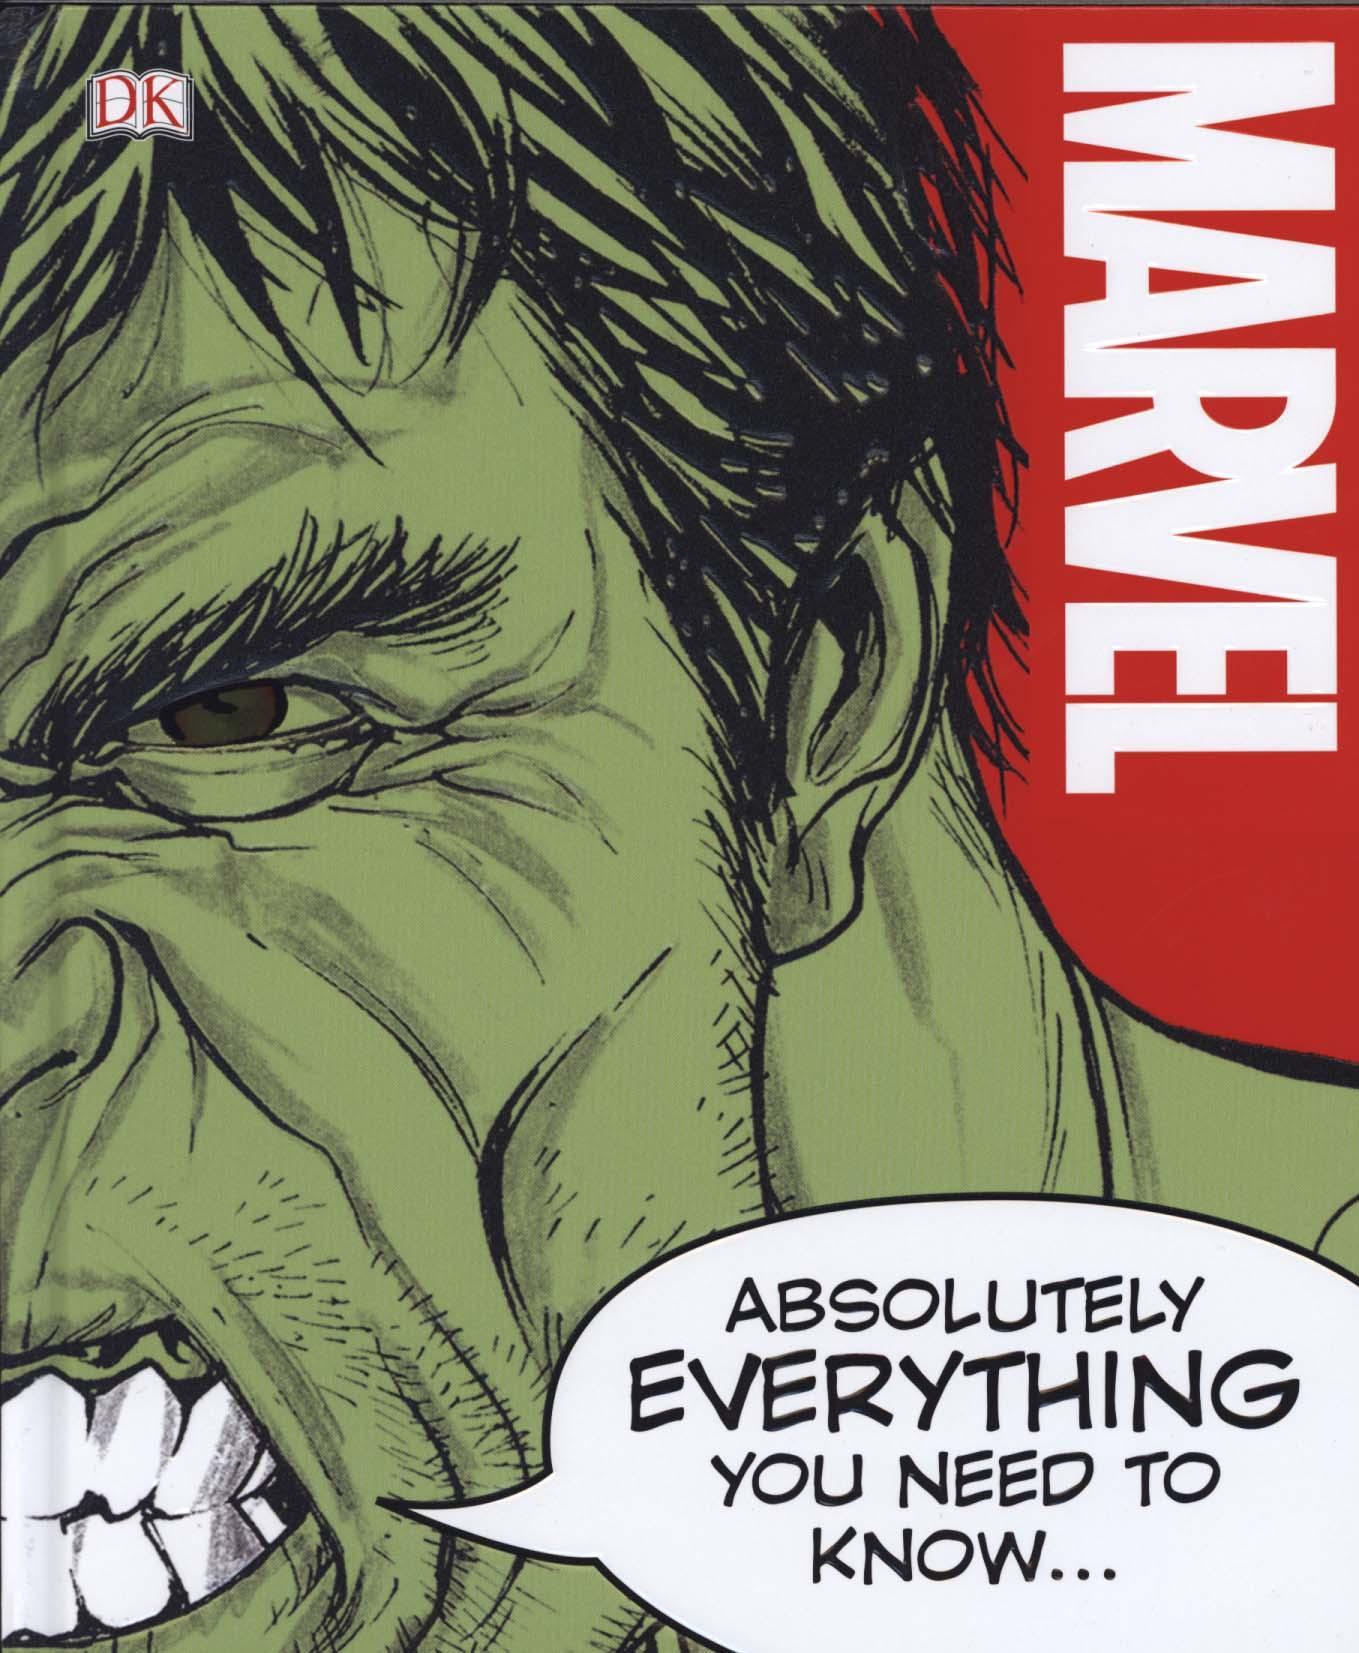 Marvel Absolutely Everything You Need To Know -  DK